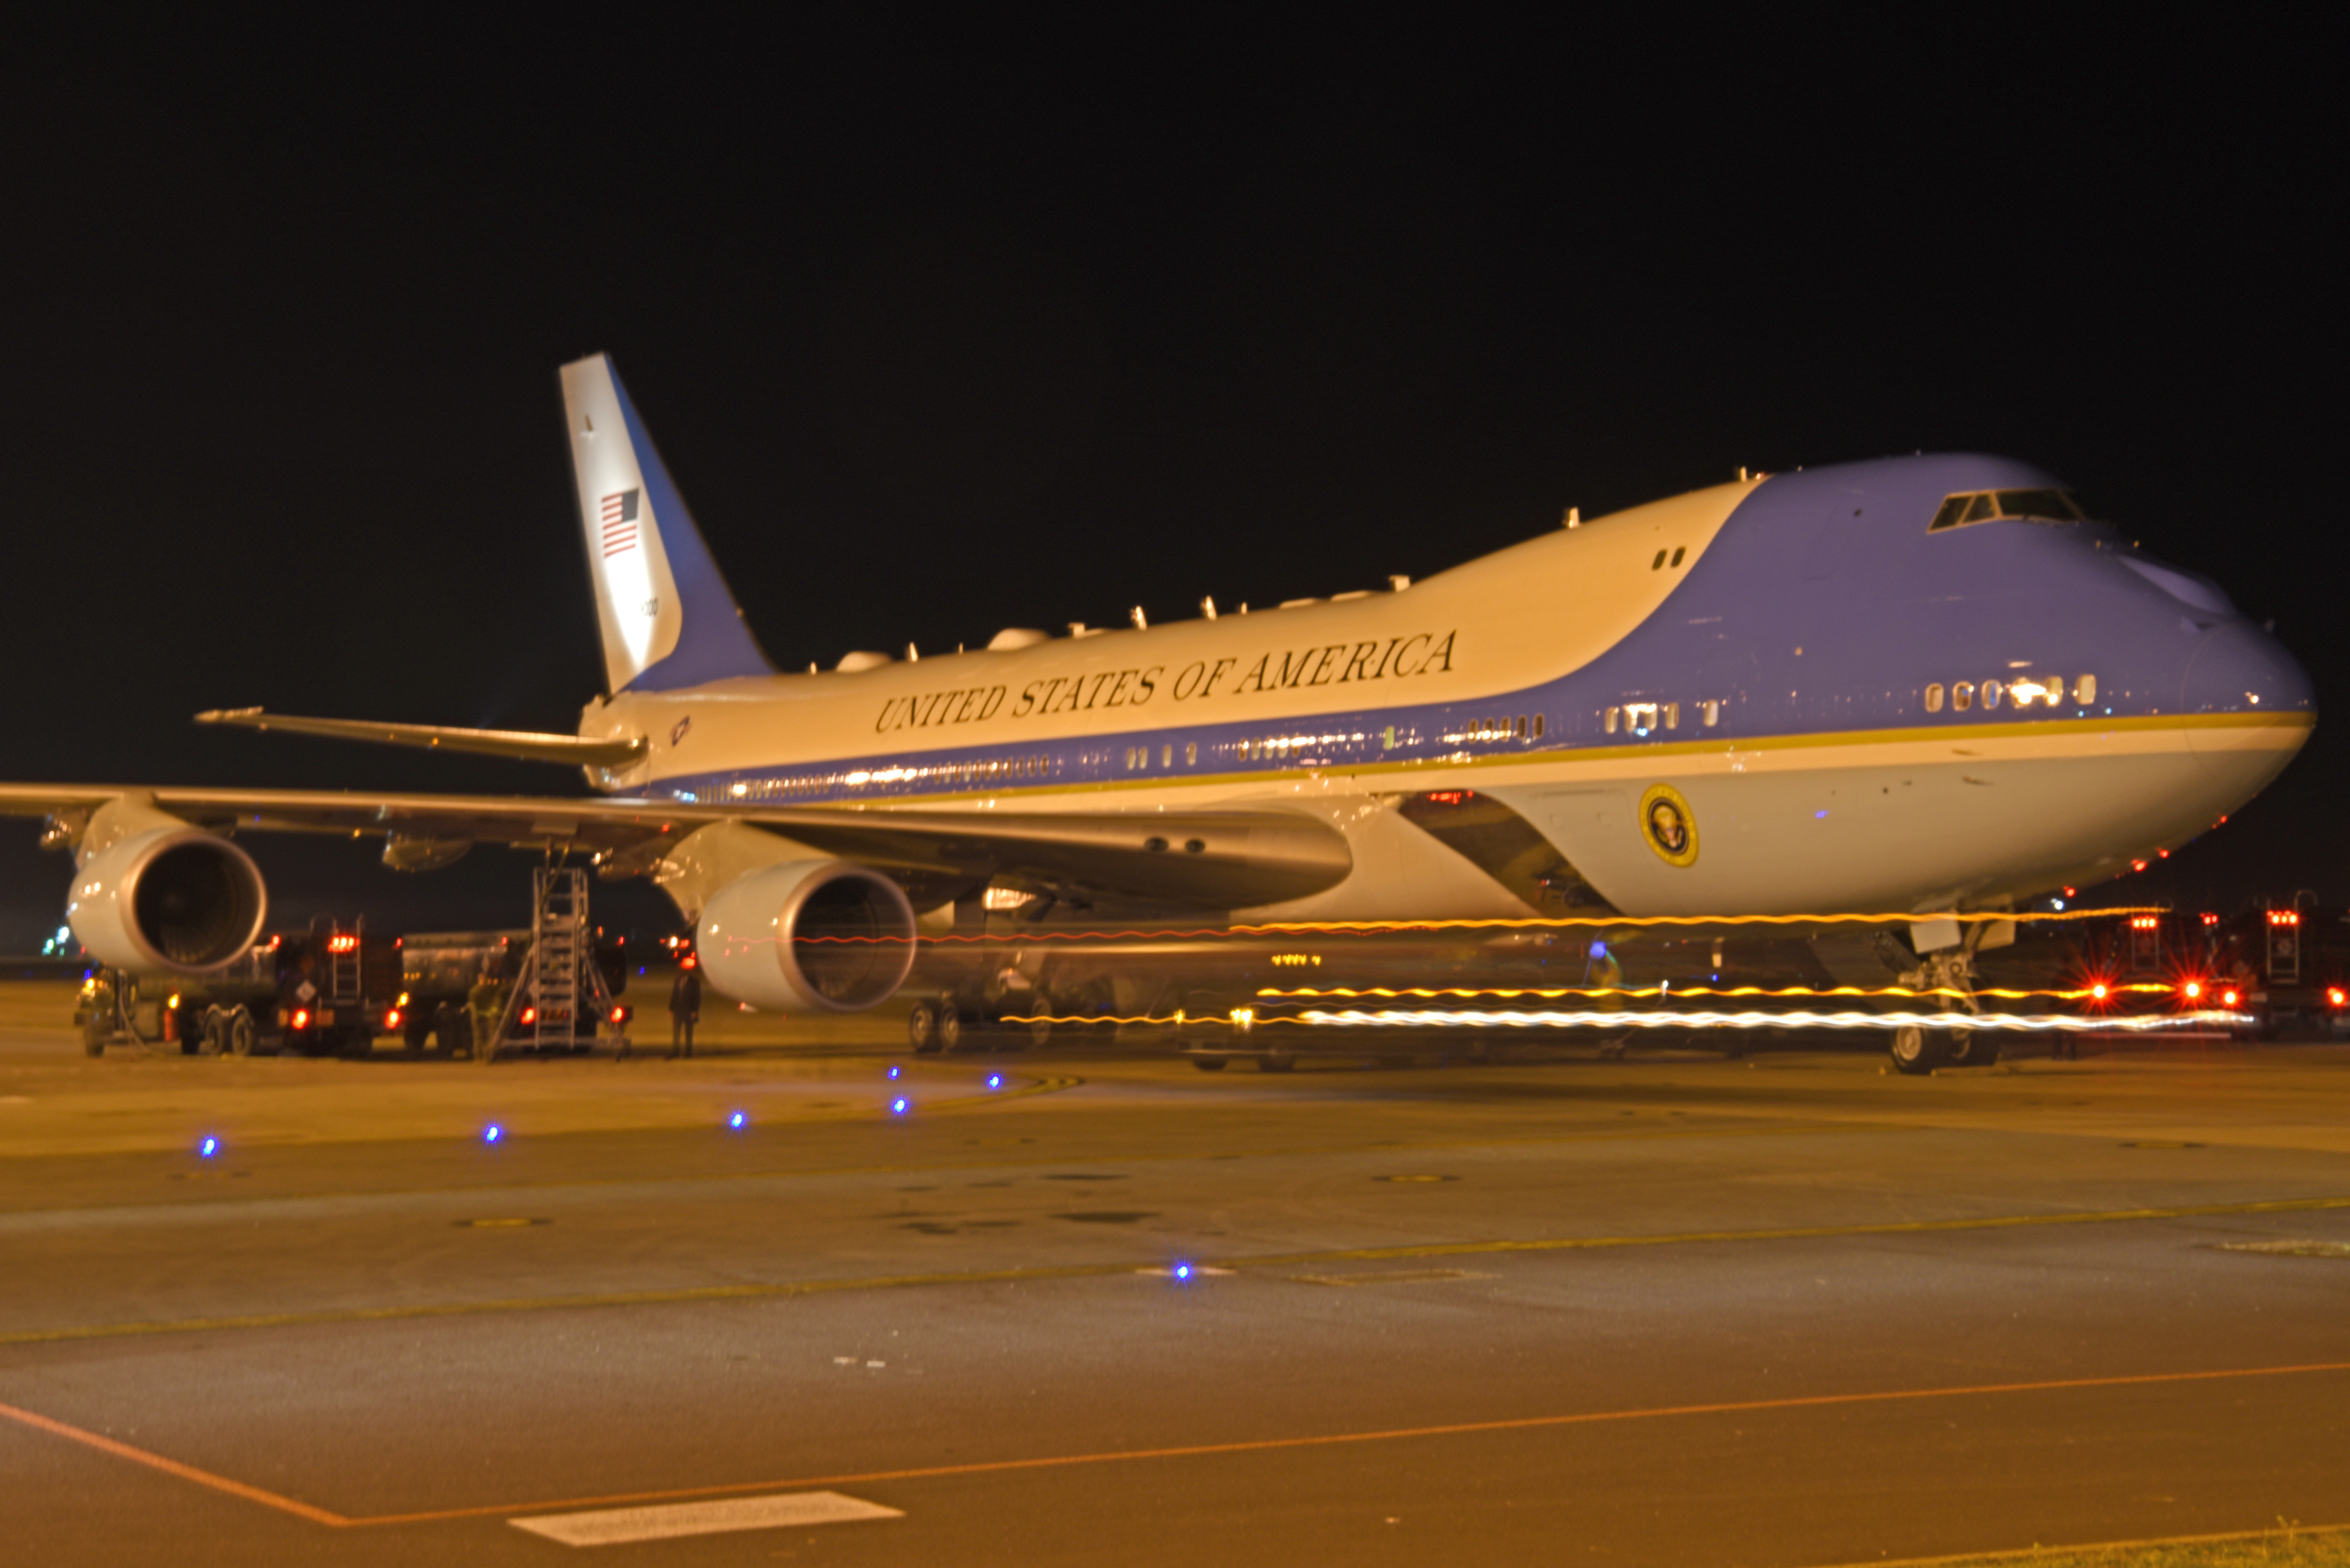 Air Force One touches down at RAF Mildenhall \u003e Royal Air Force Mildenhall \u003e  Article Display